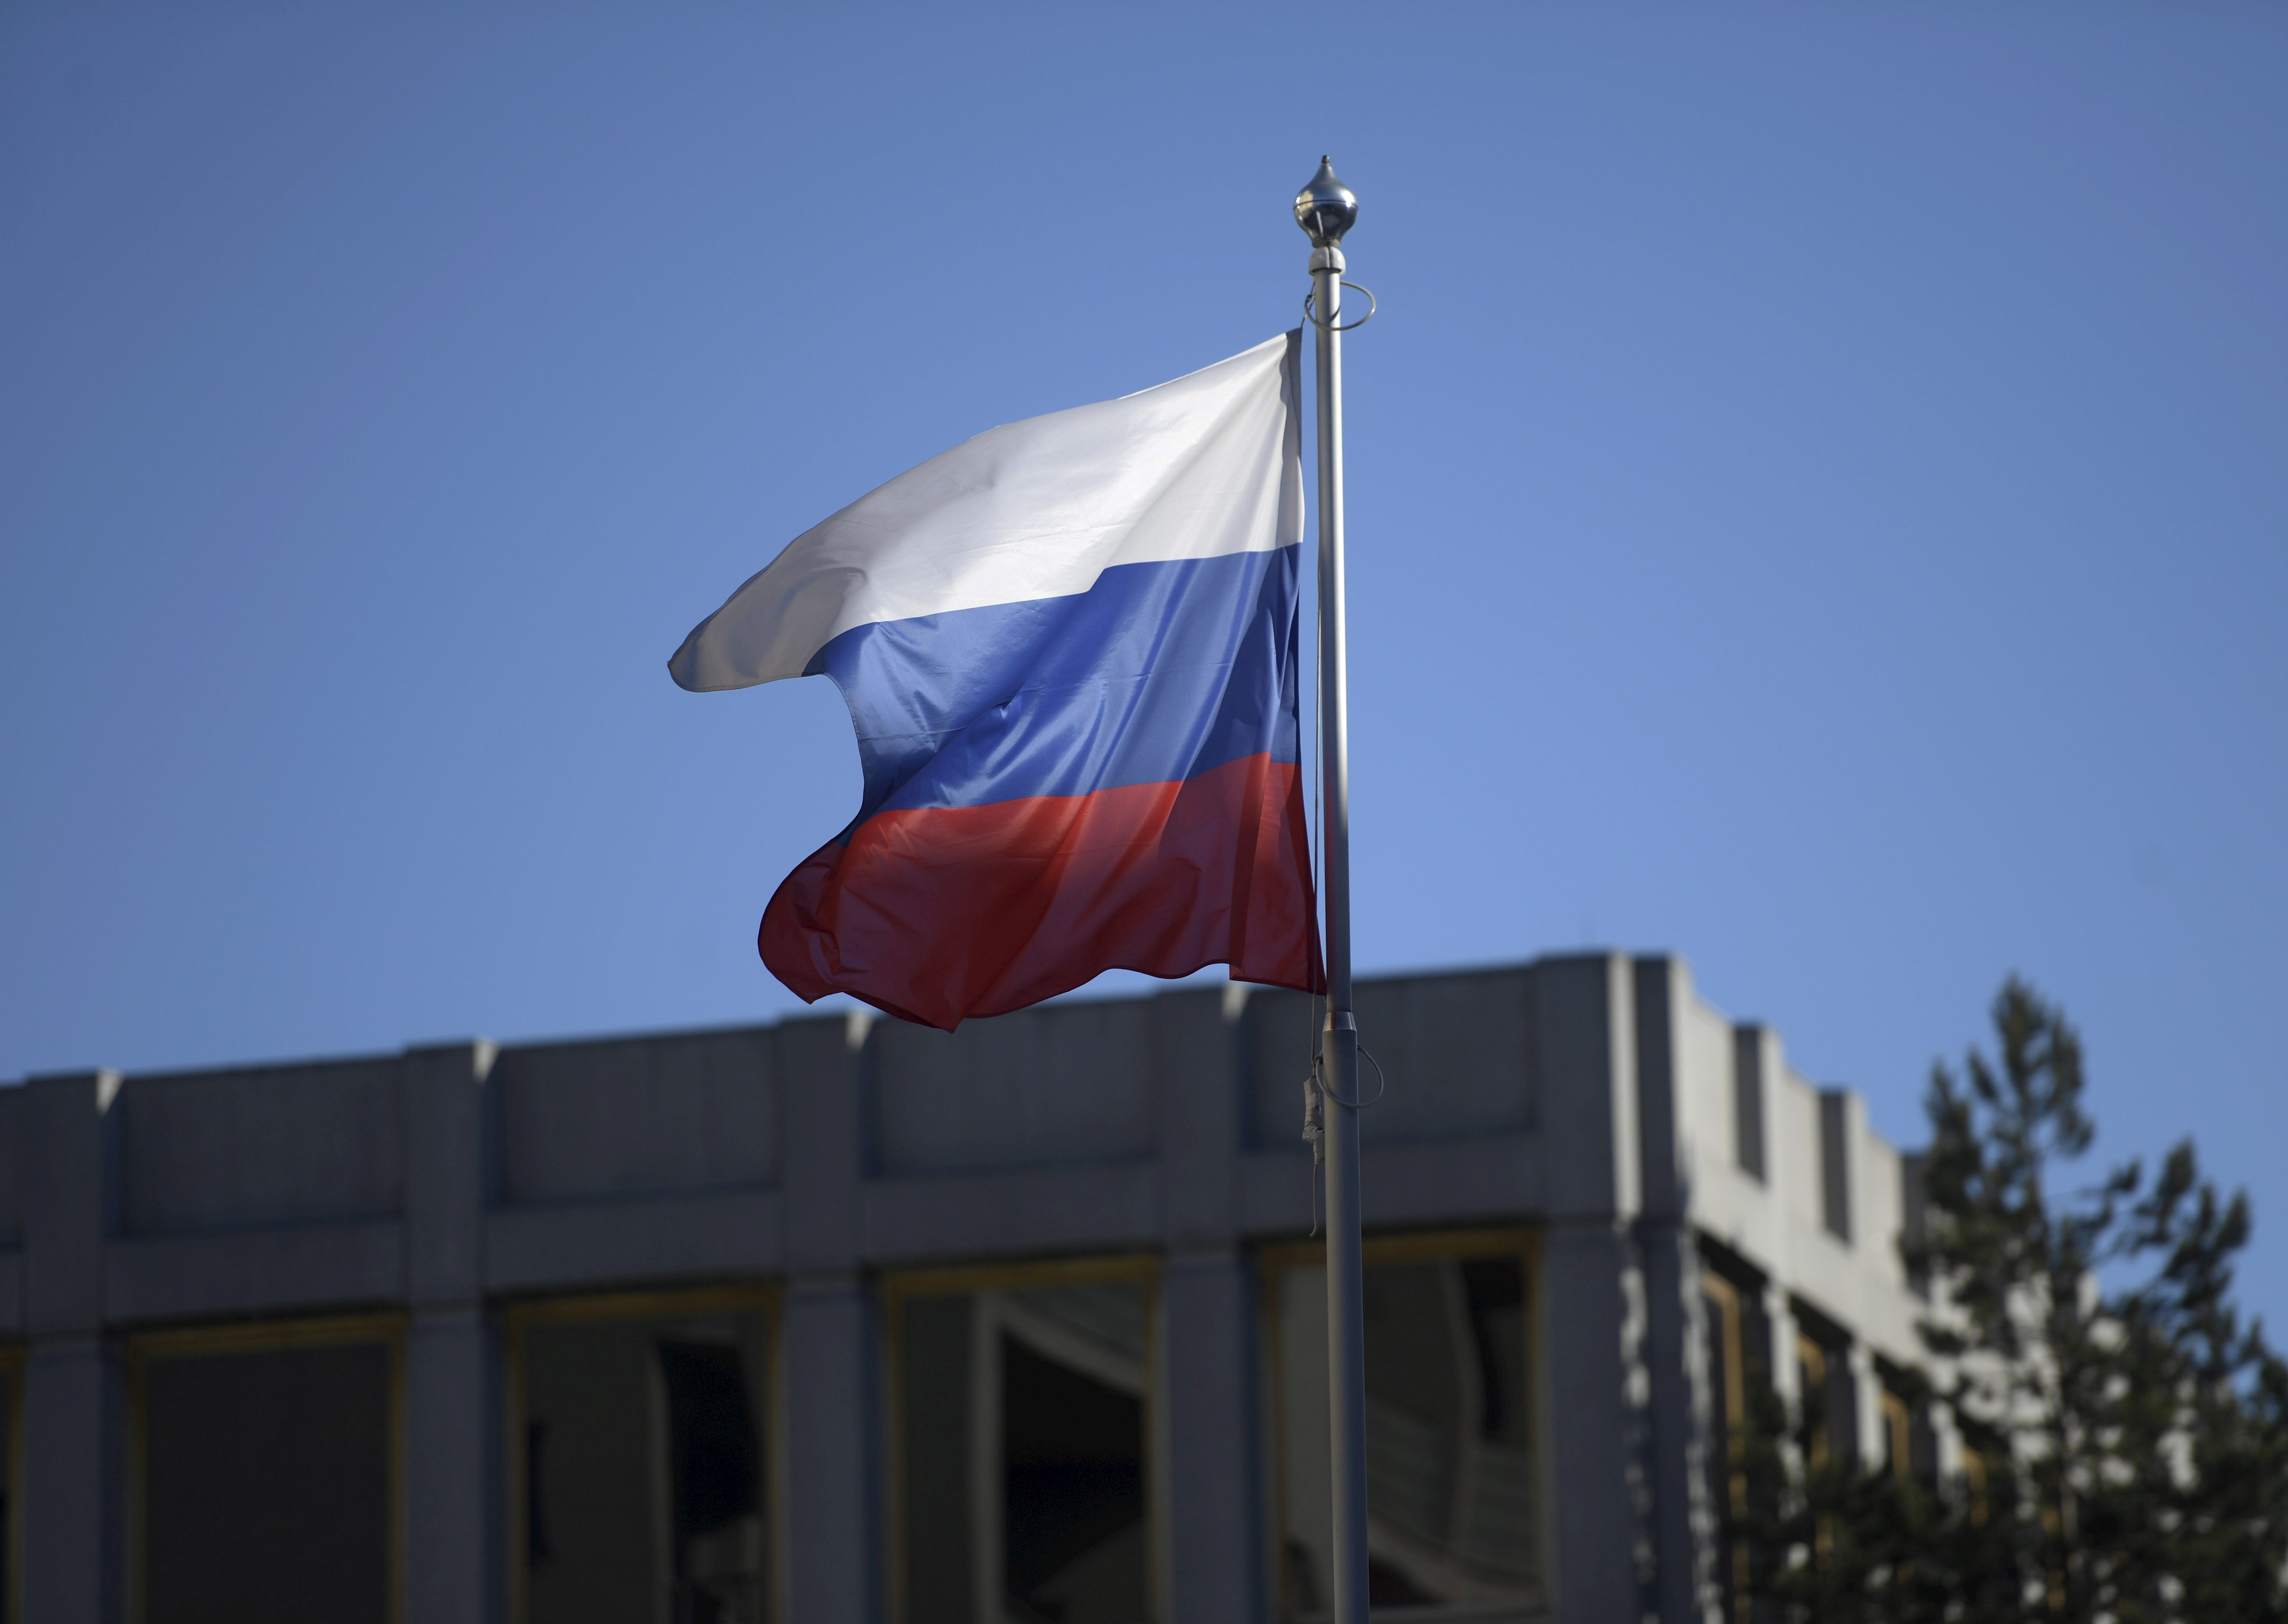 Russia complains to Finland about 'explosive noise' vandalism at consulate  | Reuters